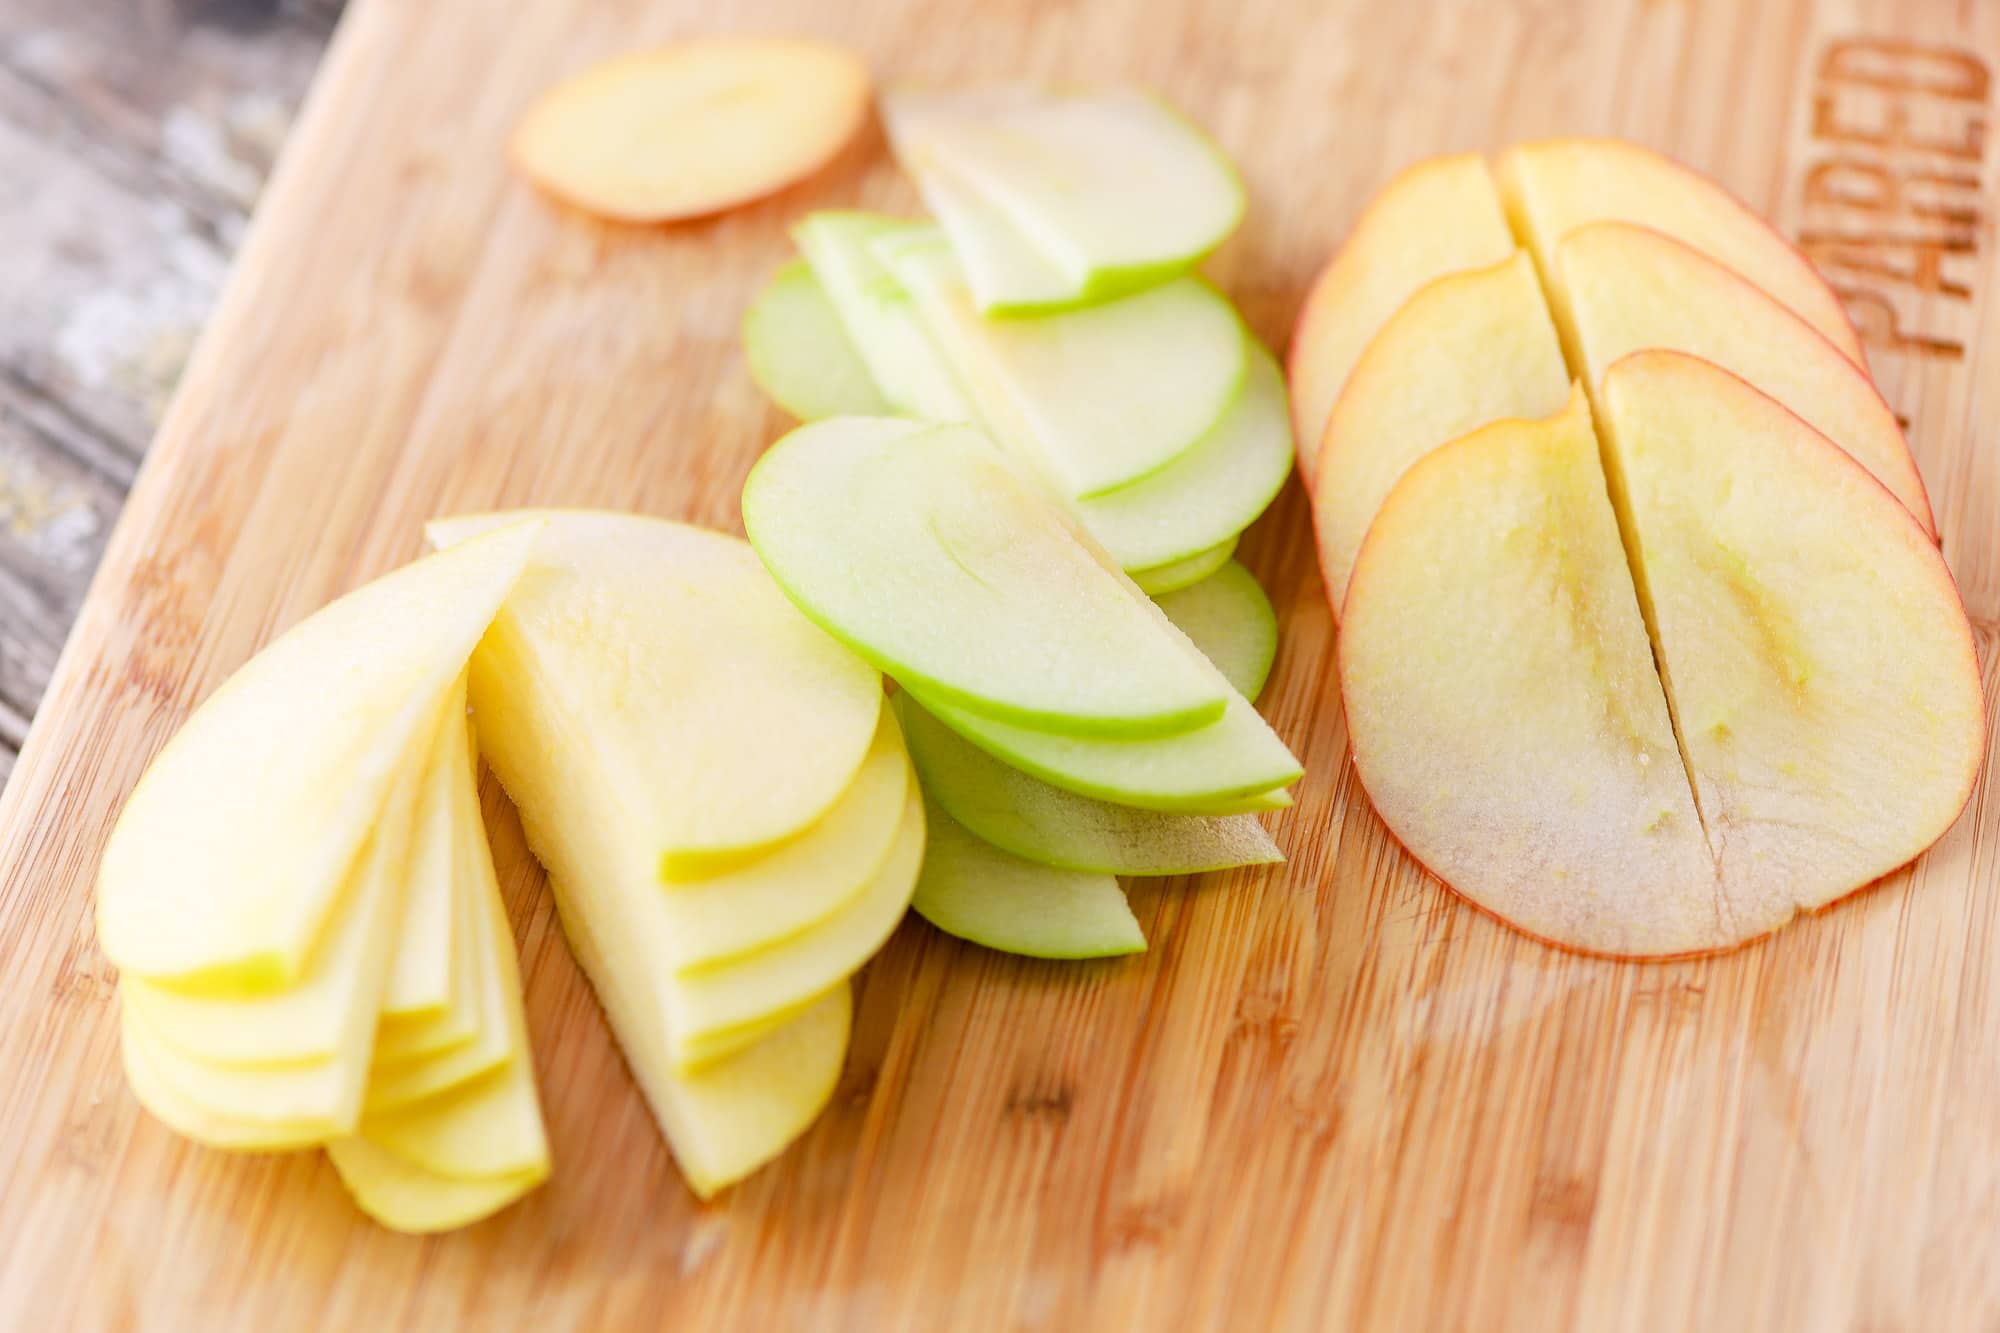 Red, Yellow, and Green Apple Slices on a Wood Cutting Board